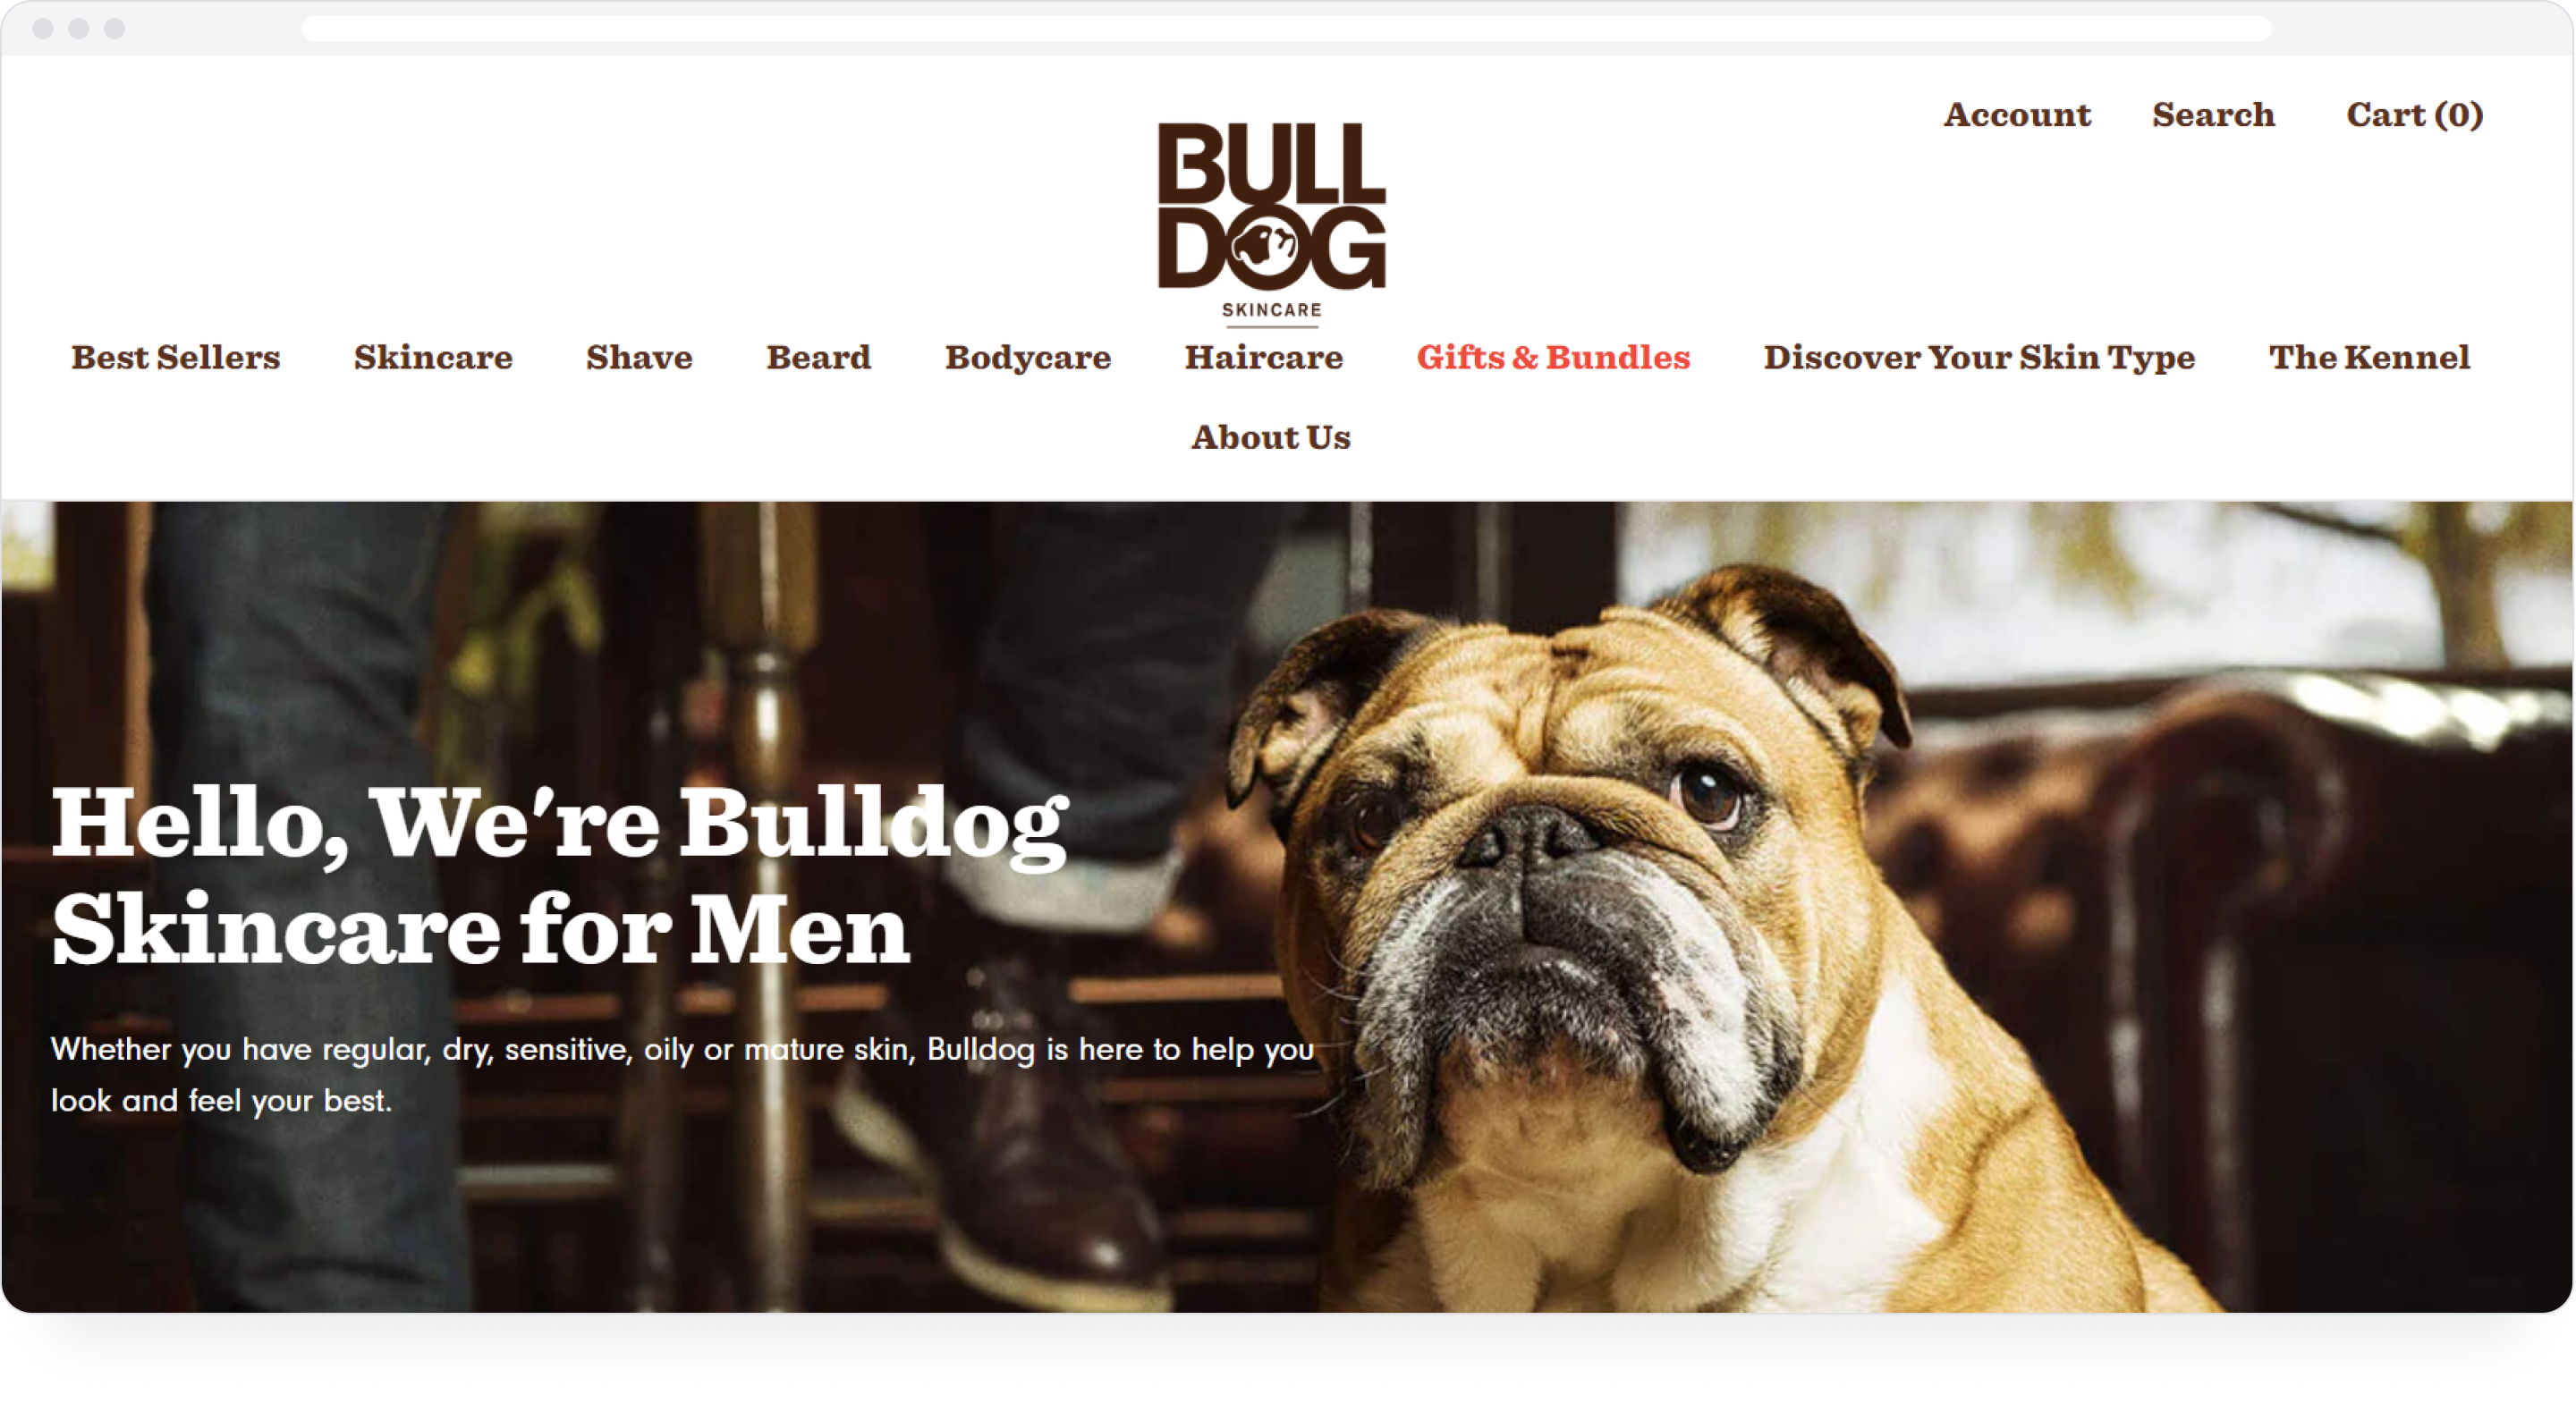 Bulldog Skincare's "About Me" section